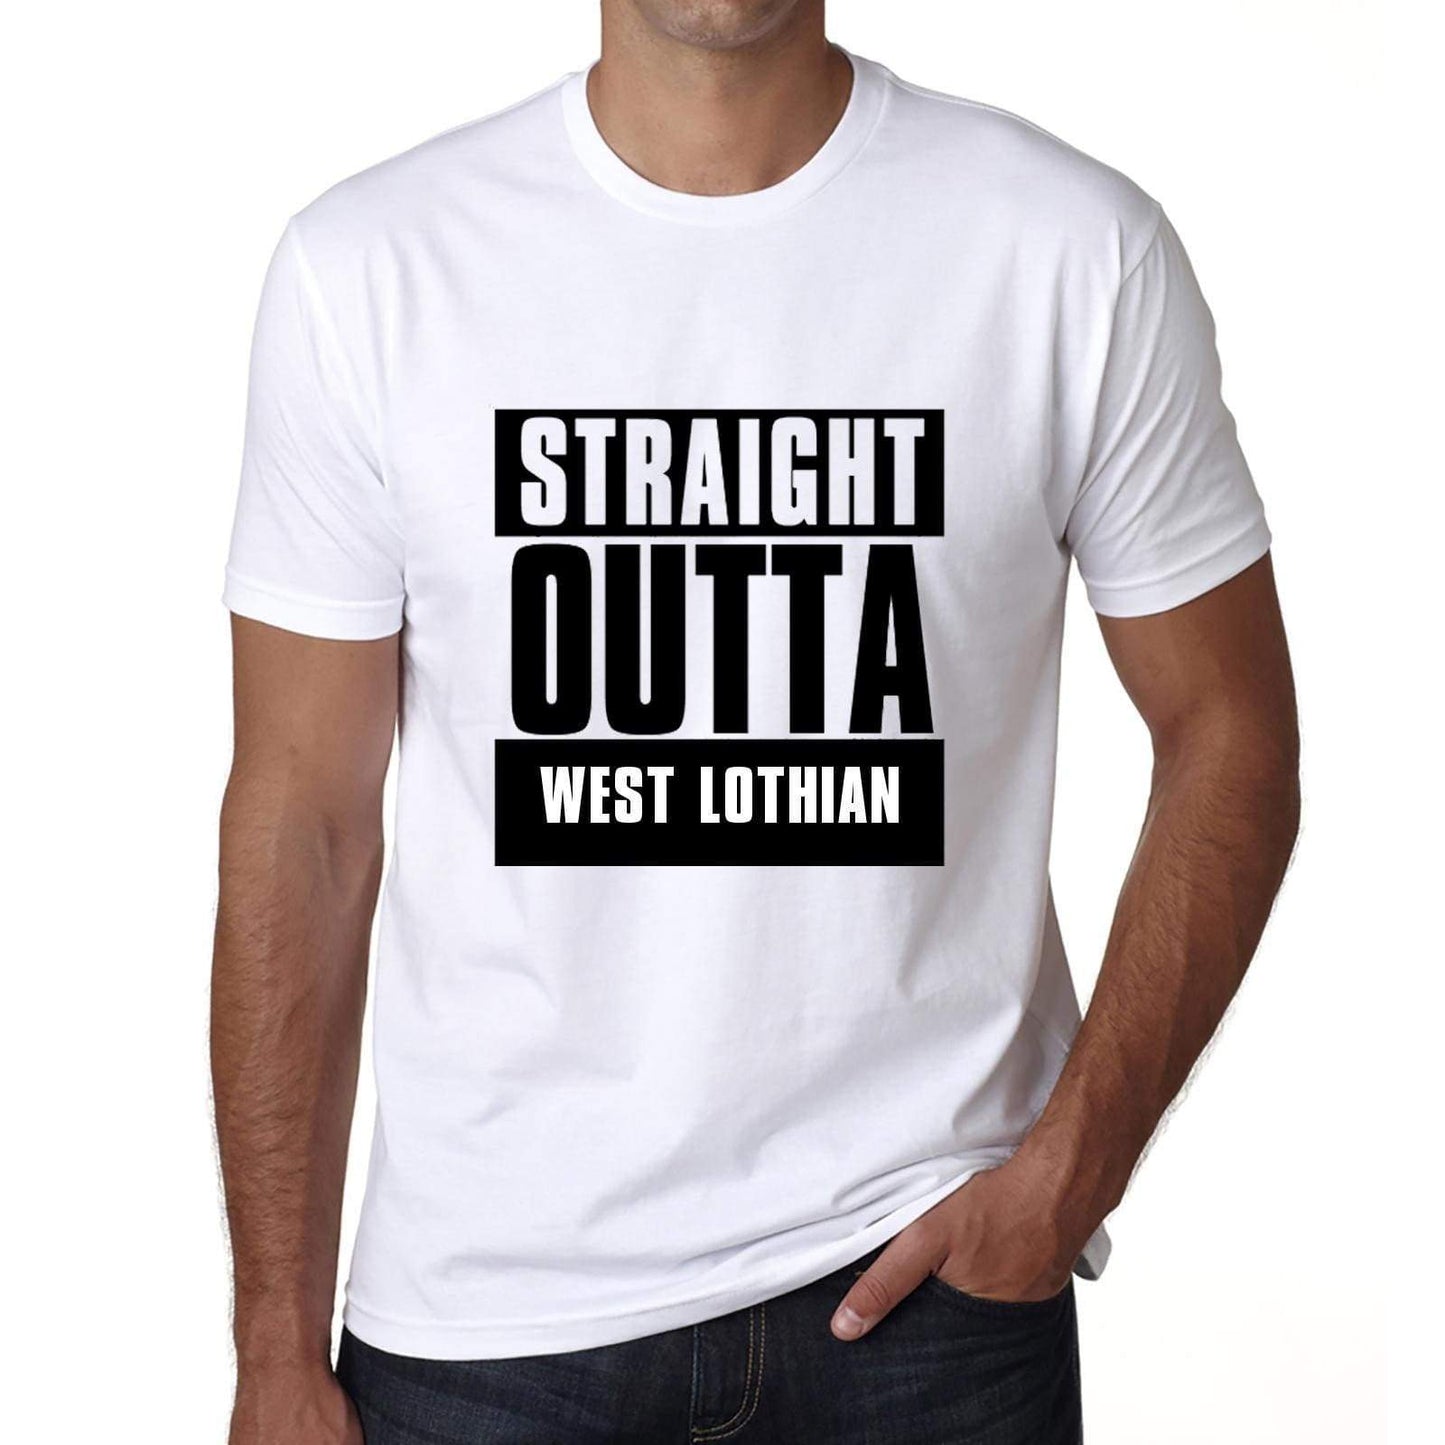 Straight Outta West Lothian Mens Short Sleeve Round Neck T-Shirt 00027 - White / S - Casual